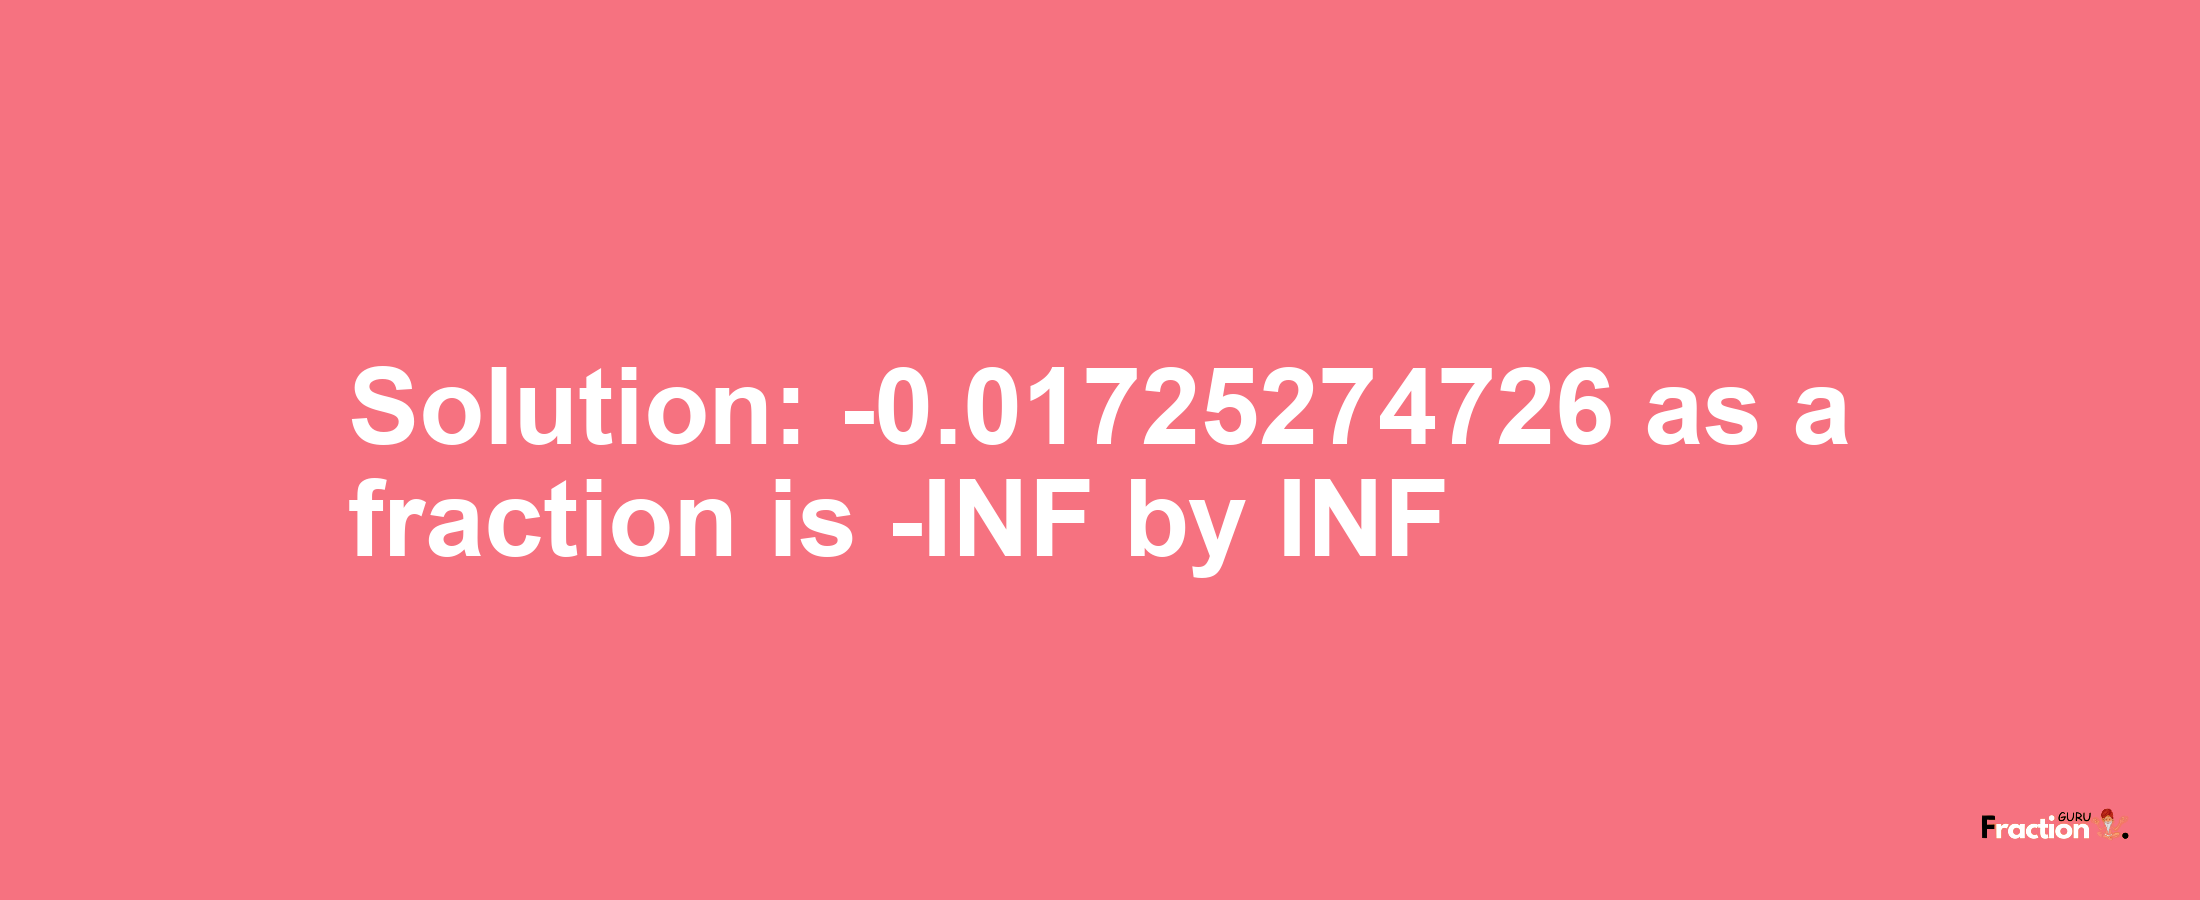 Solution:-0.01725274726 as a fraction is -INF/INF